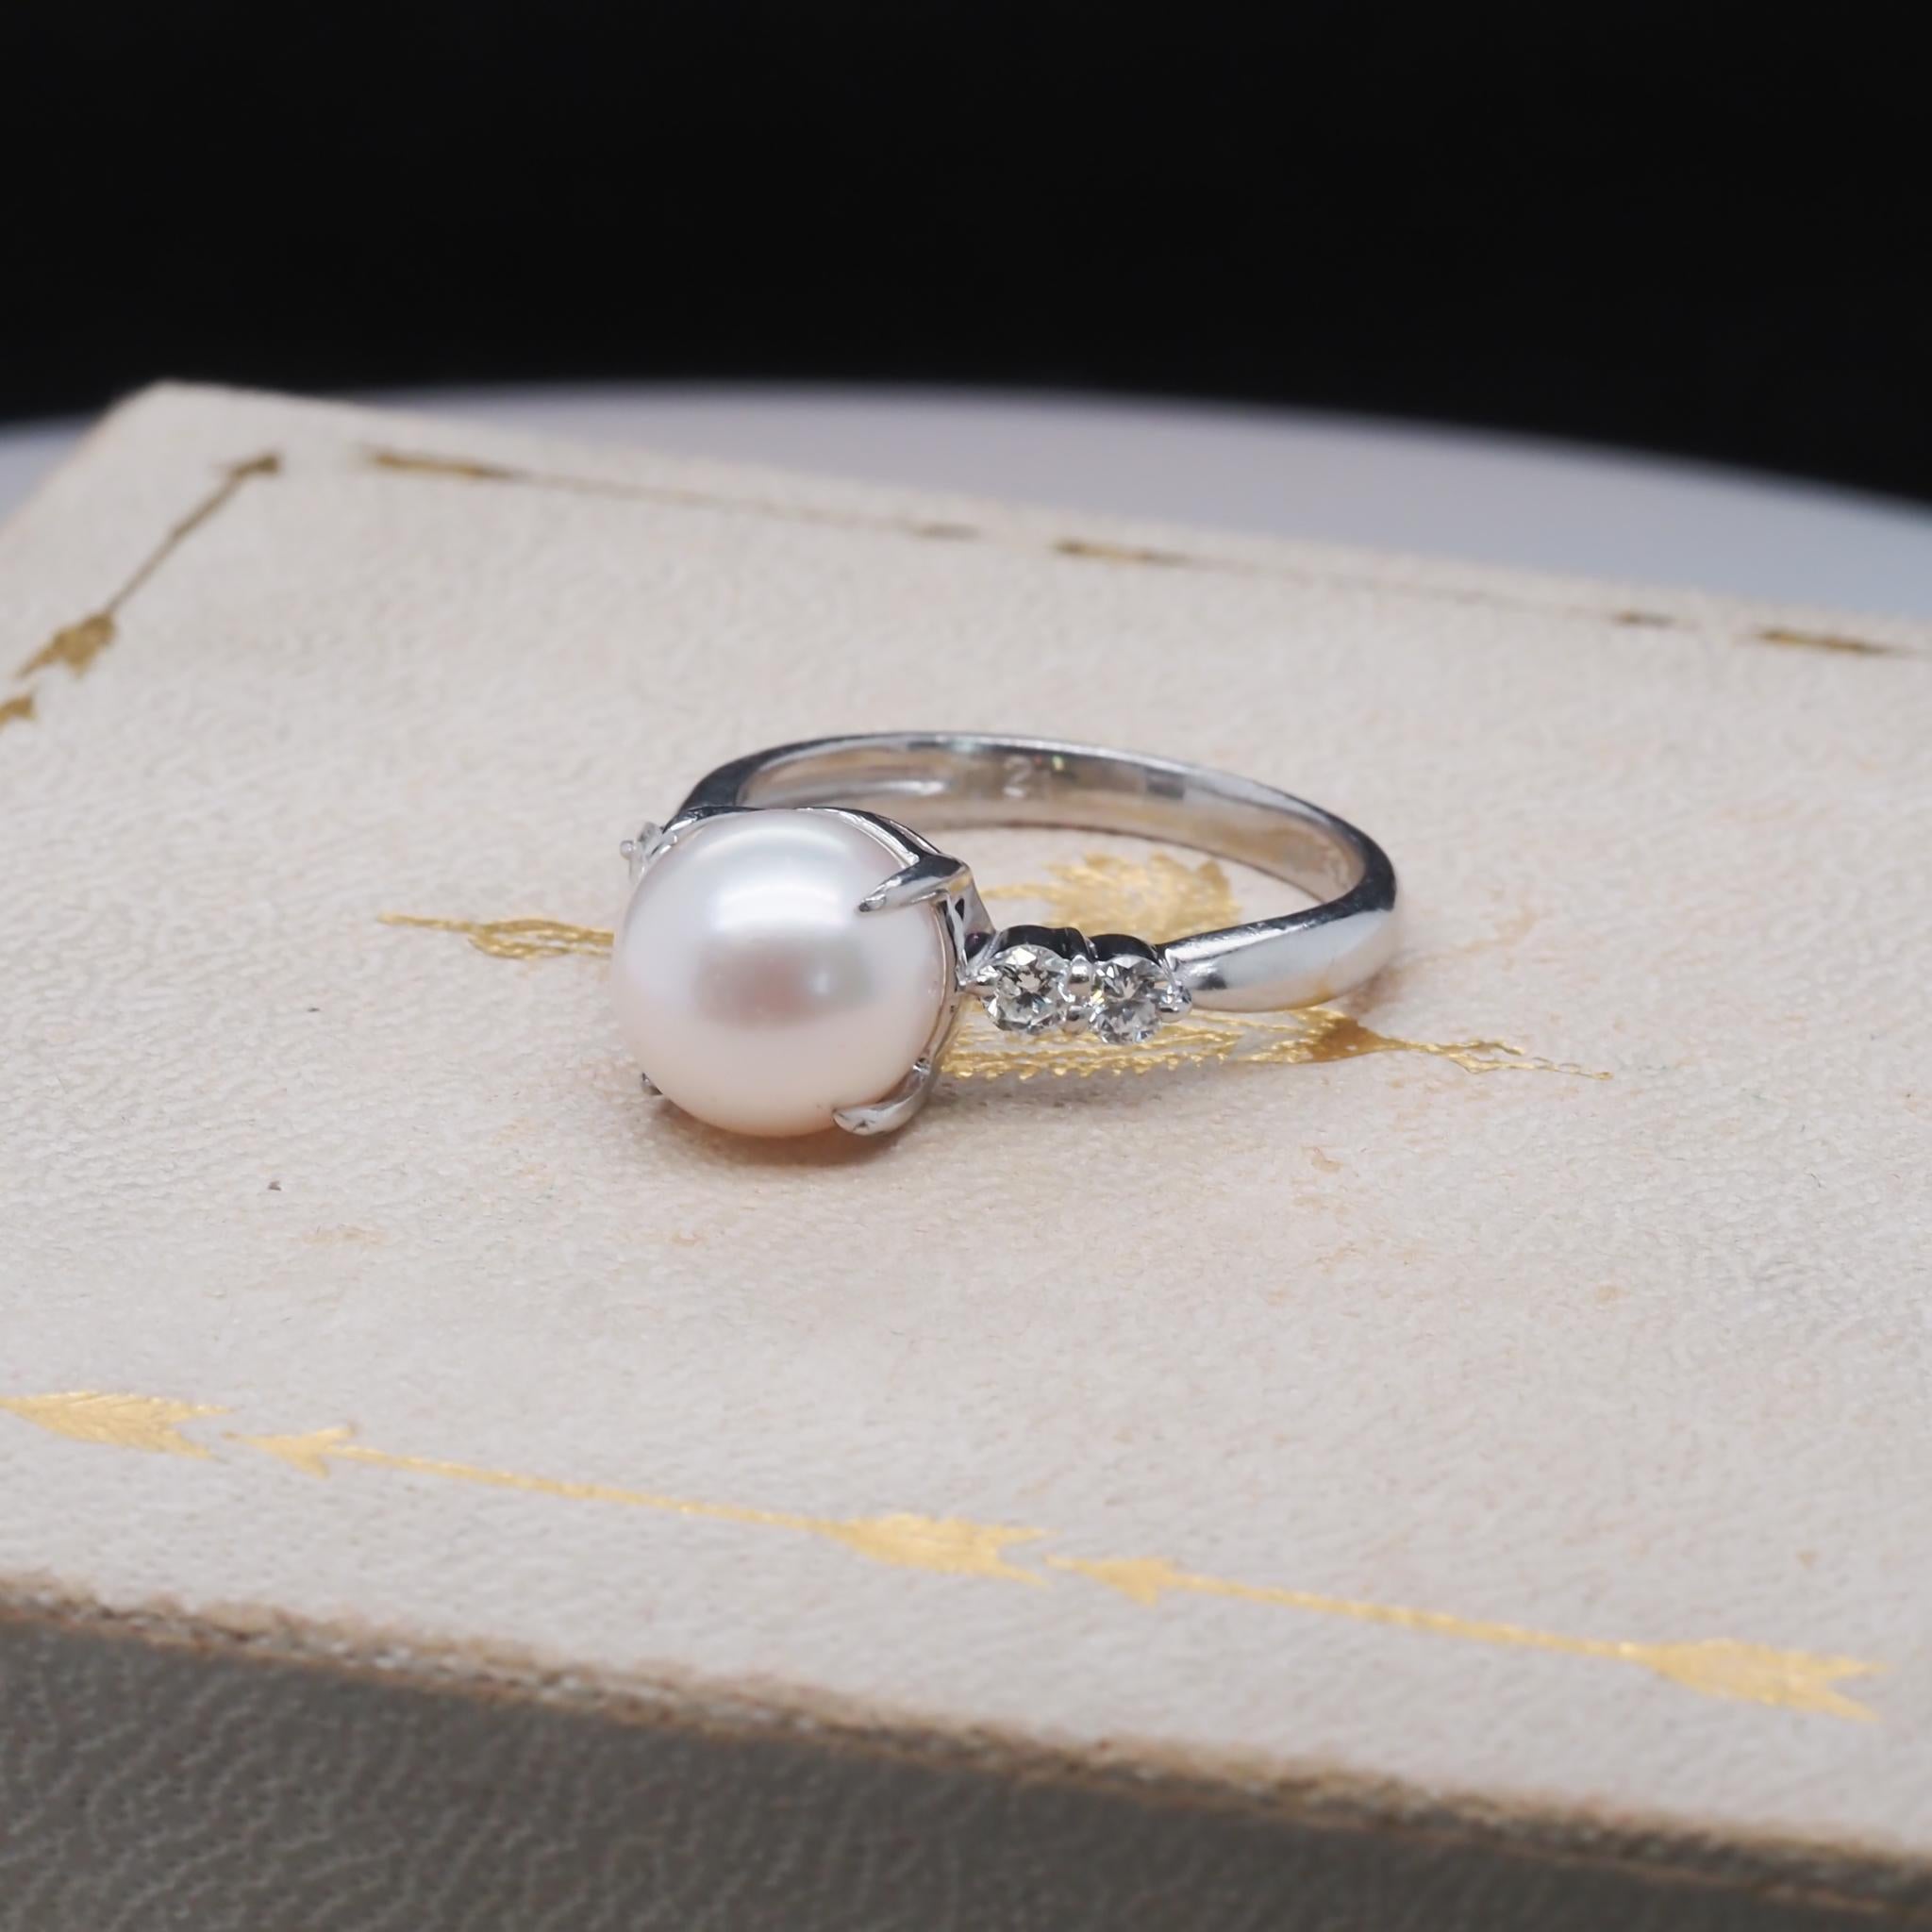 Item Details:
Ring Size: 5.5
Metal Type: [Hallmarked, and Tested]
Weight: 4.0 grams
Diamond Details
Center Stone: 8.2mm, Cultured Pearl, Pinkish Hue
Side Diamonds: Round Brilliant, Natural, .20ct total weight, F-G Color, VS Clarity
Band Width: